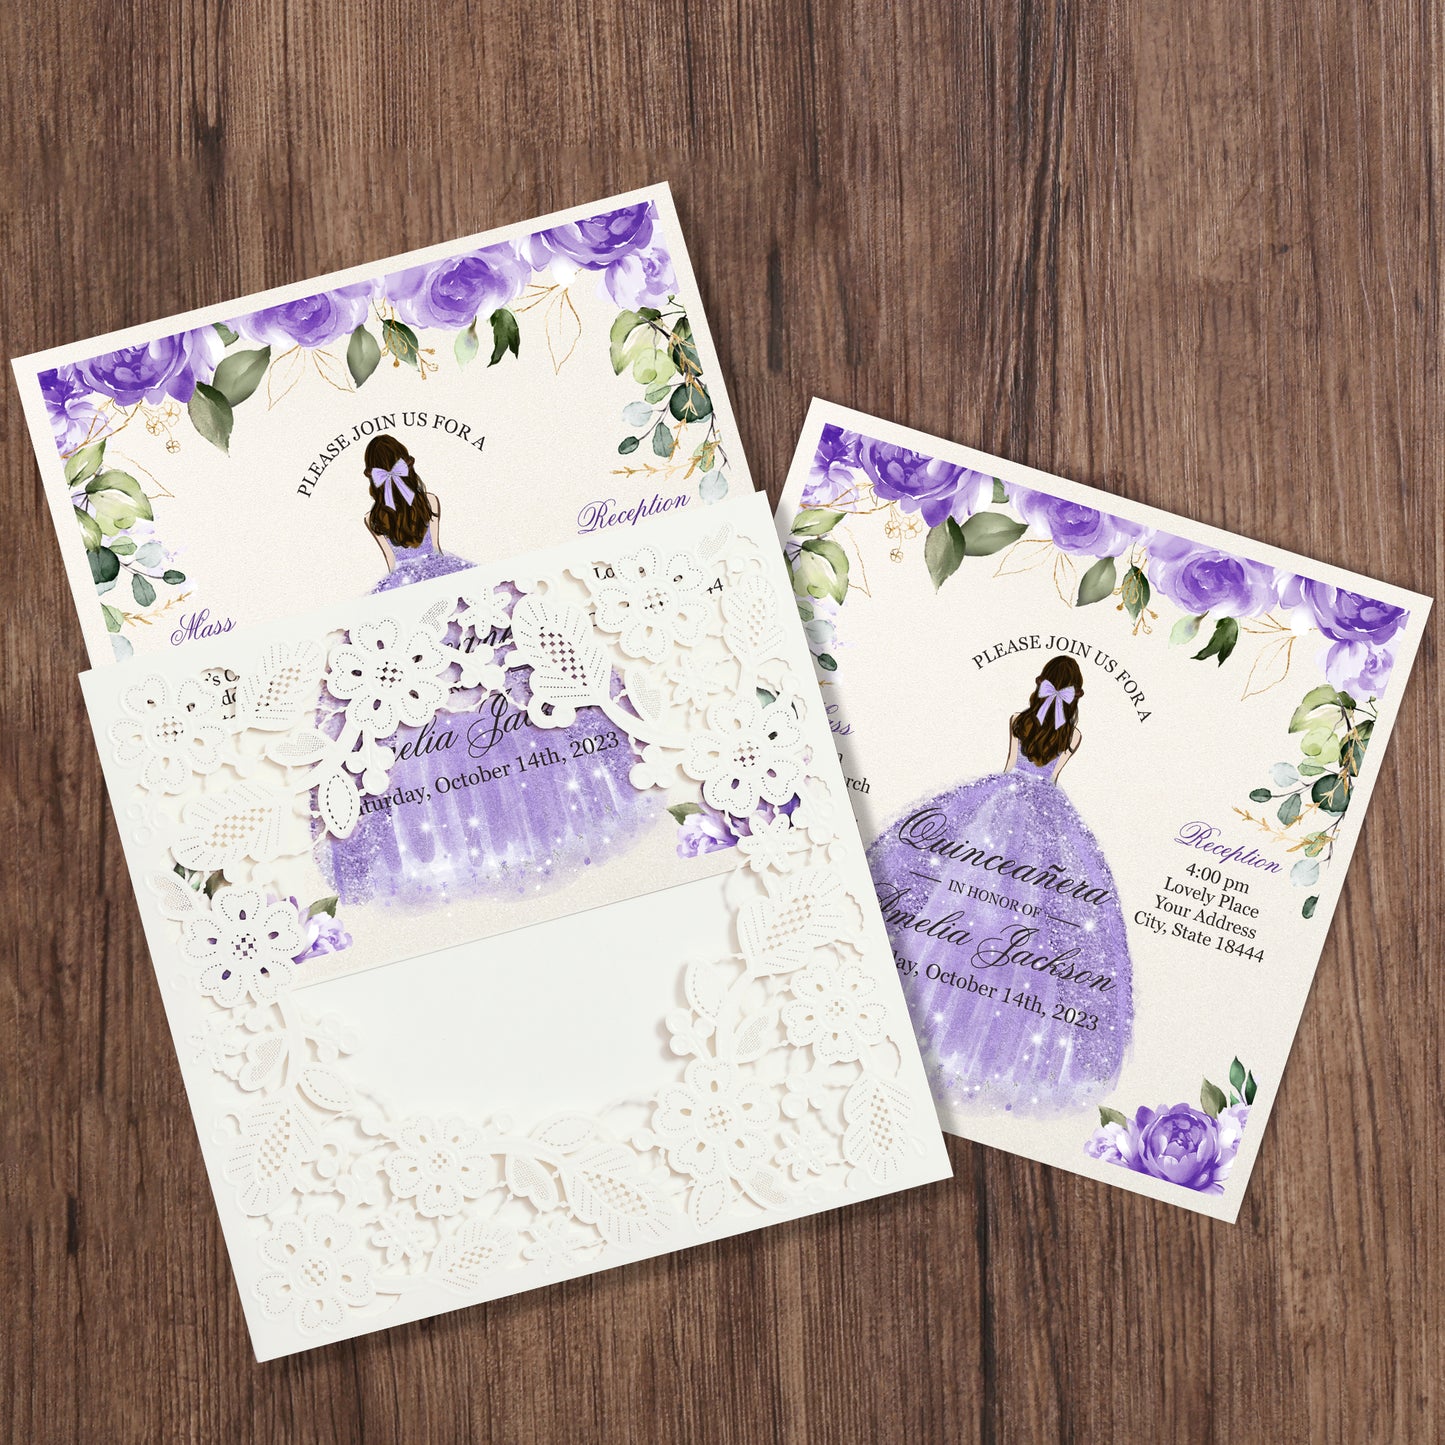 Customized Quinceanera Invitation Lavender, Elegant 15 years Invitations Sweet 16, Miss XV, Birthday Laser Cut Quince Invitation Cards White Personalized